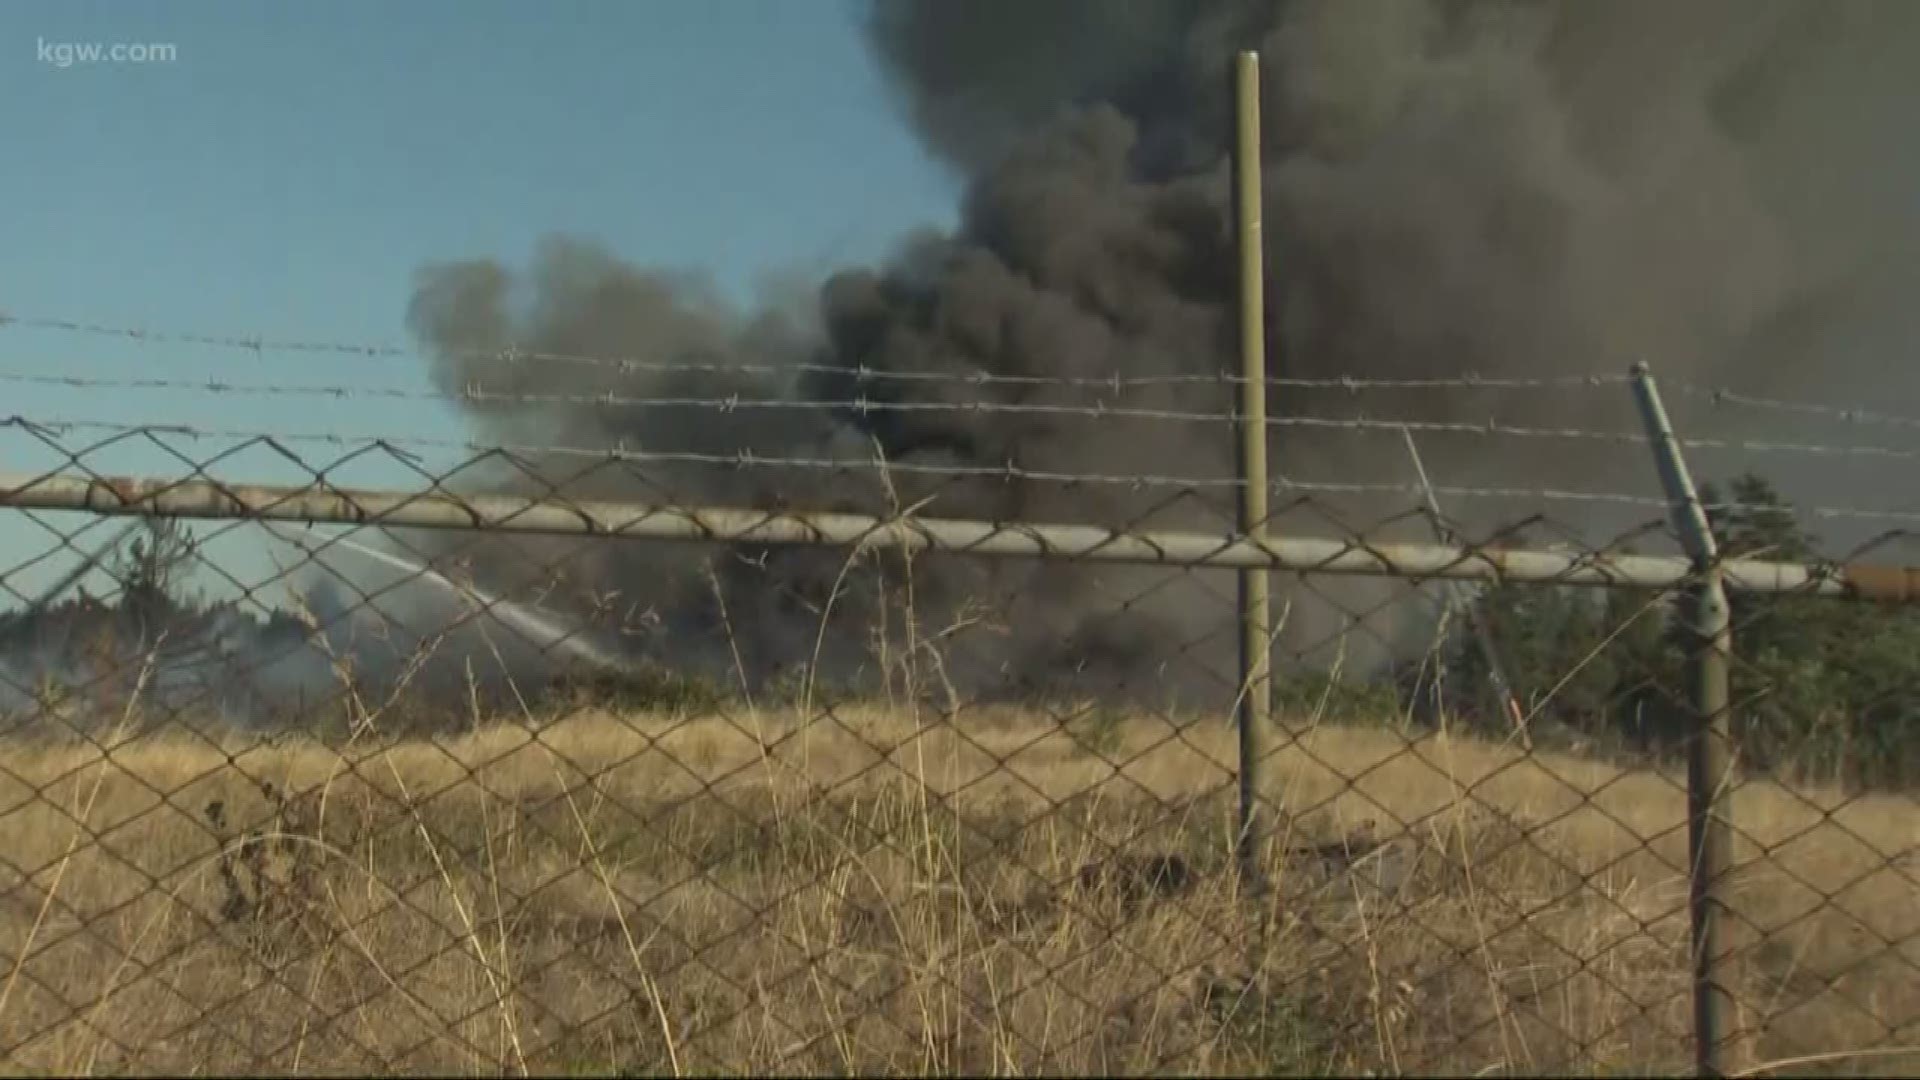 A 4 alarm fire burning in NE Portland produced smoke that could be seen for miles.